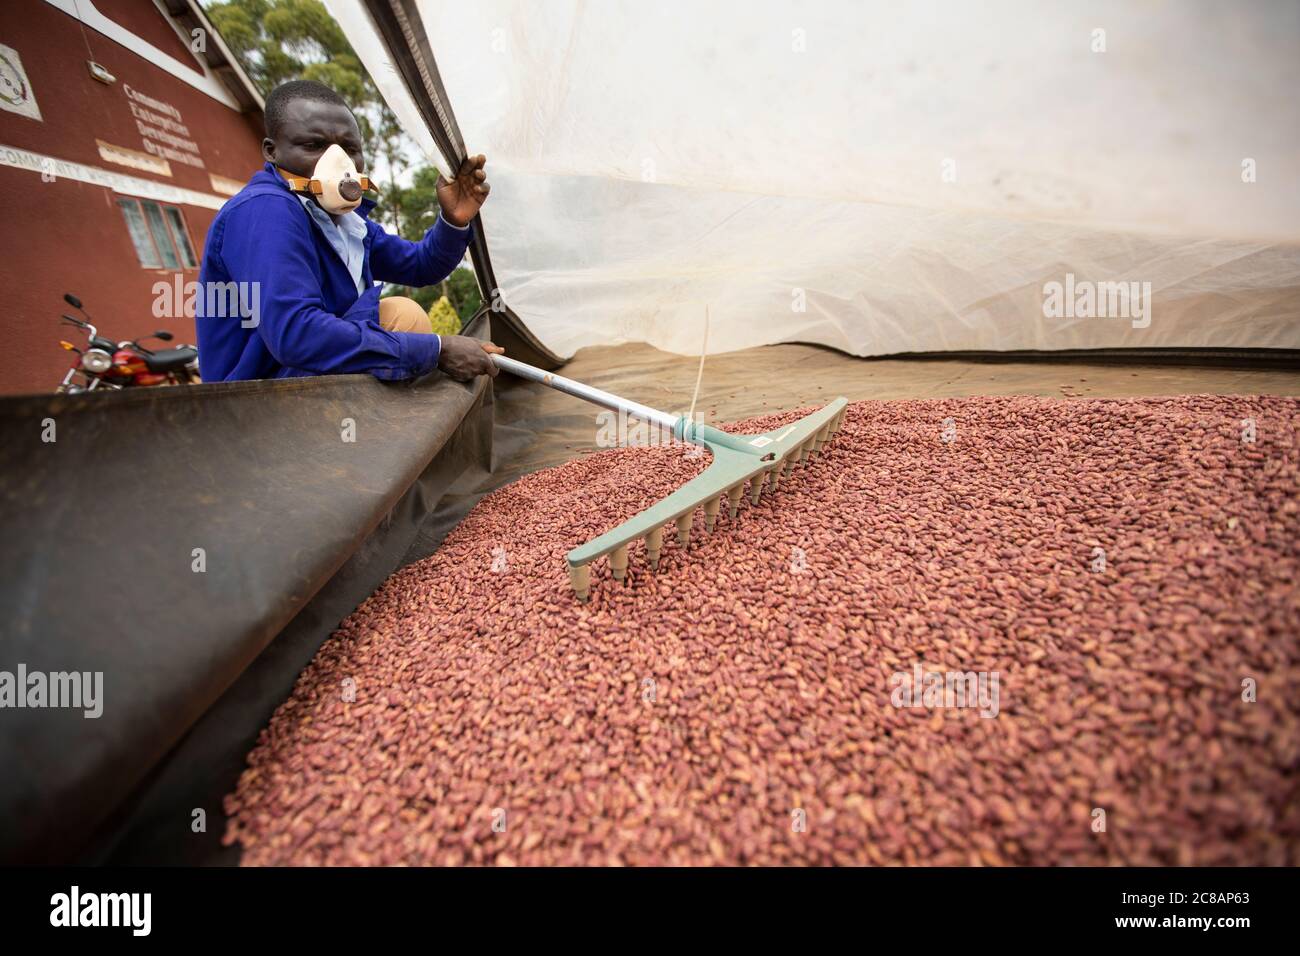 A technician dries beans in a solar dryer before they are taken to market at a bean farmers' cooperative in Masaka District, Uganda, East Africa. Stock Photo